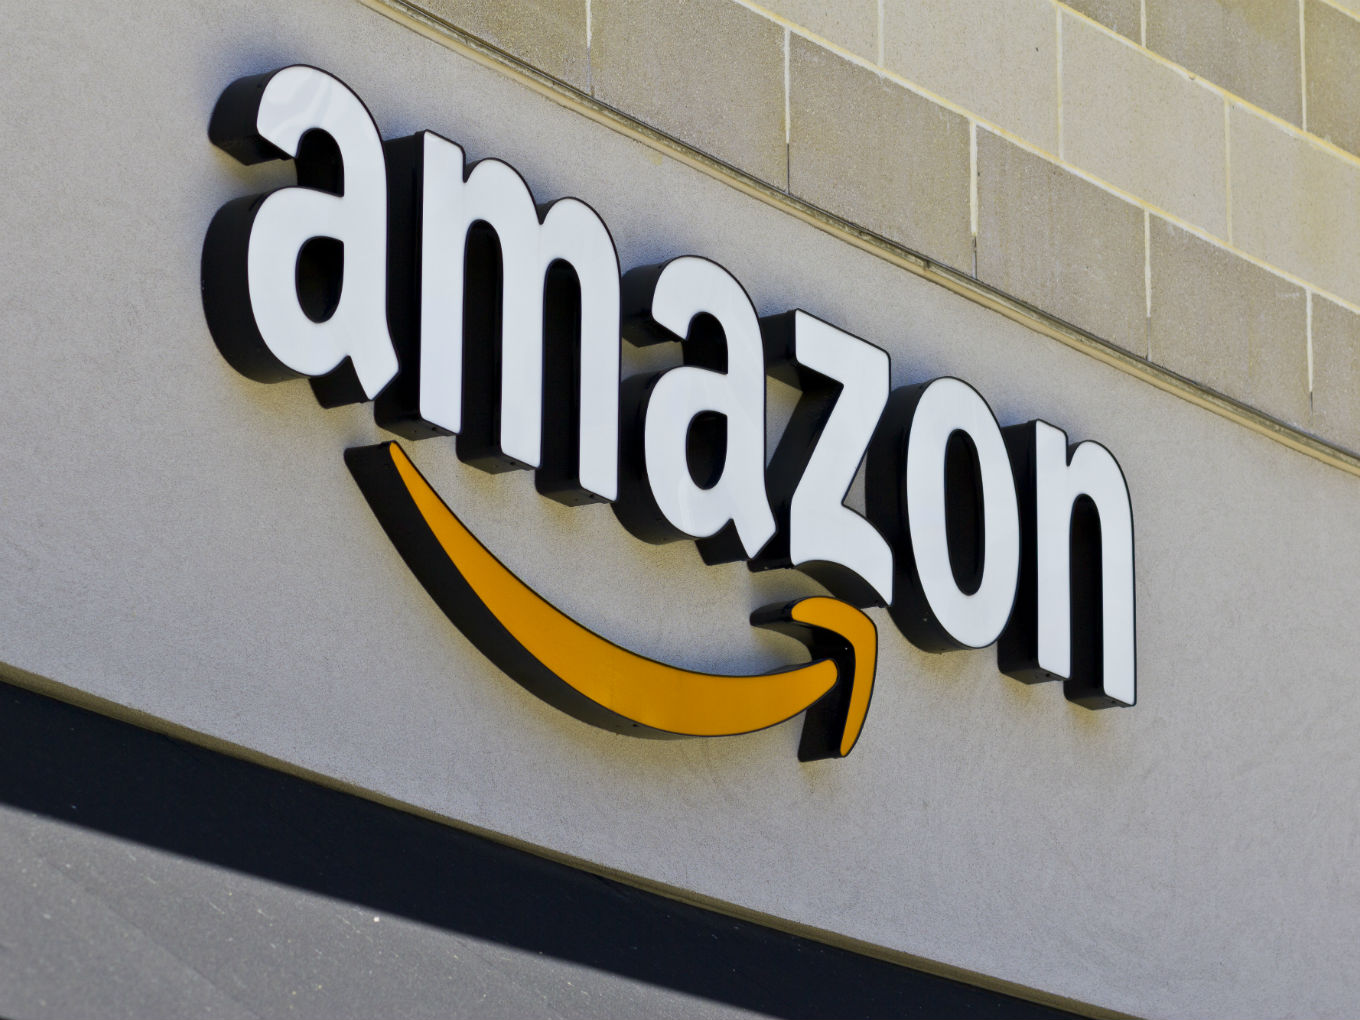 Amazon Spent $1.7Bn On Music And Video Content In Q1 2019